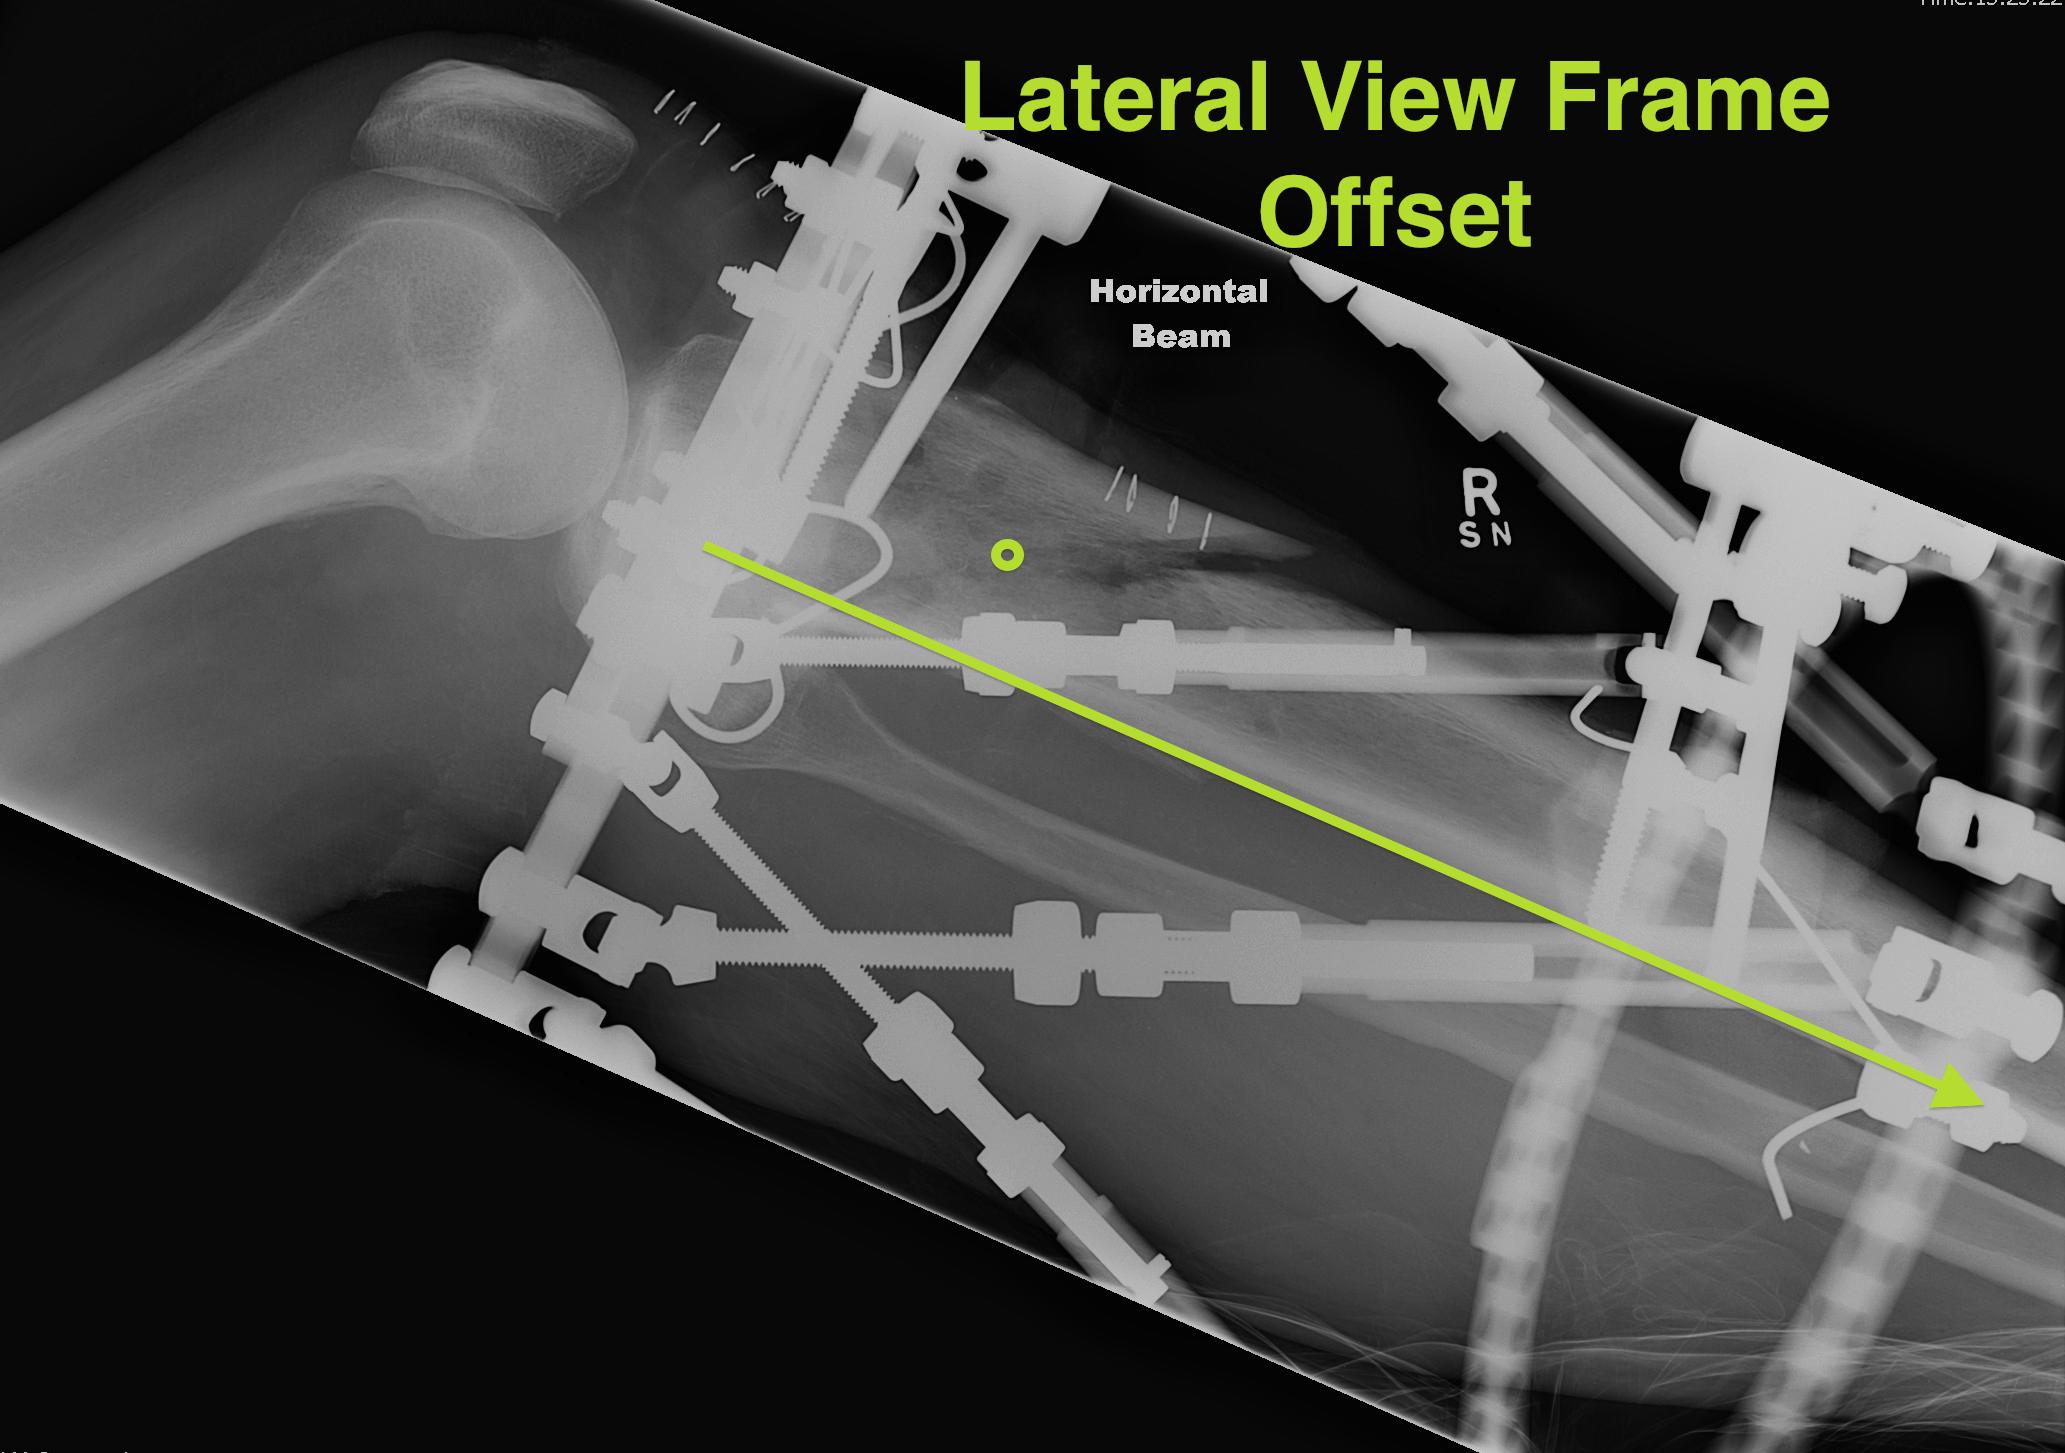 TSF Lateral View Frame Offset